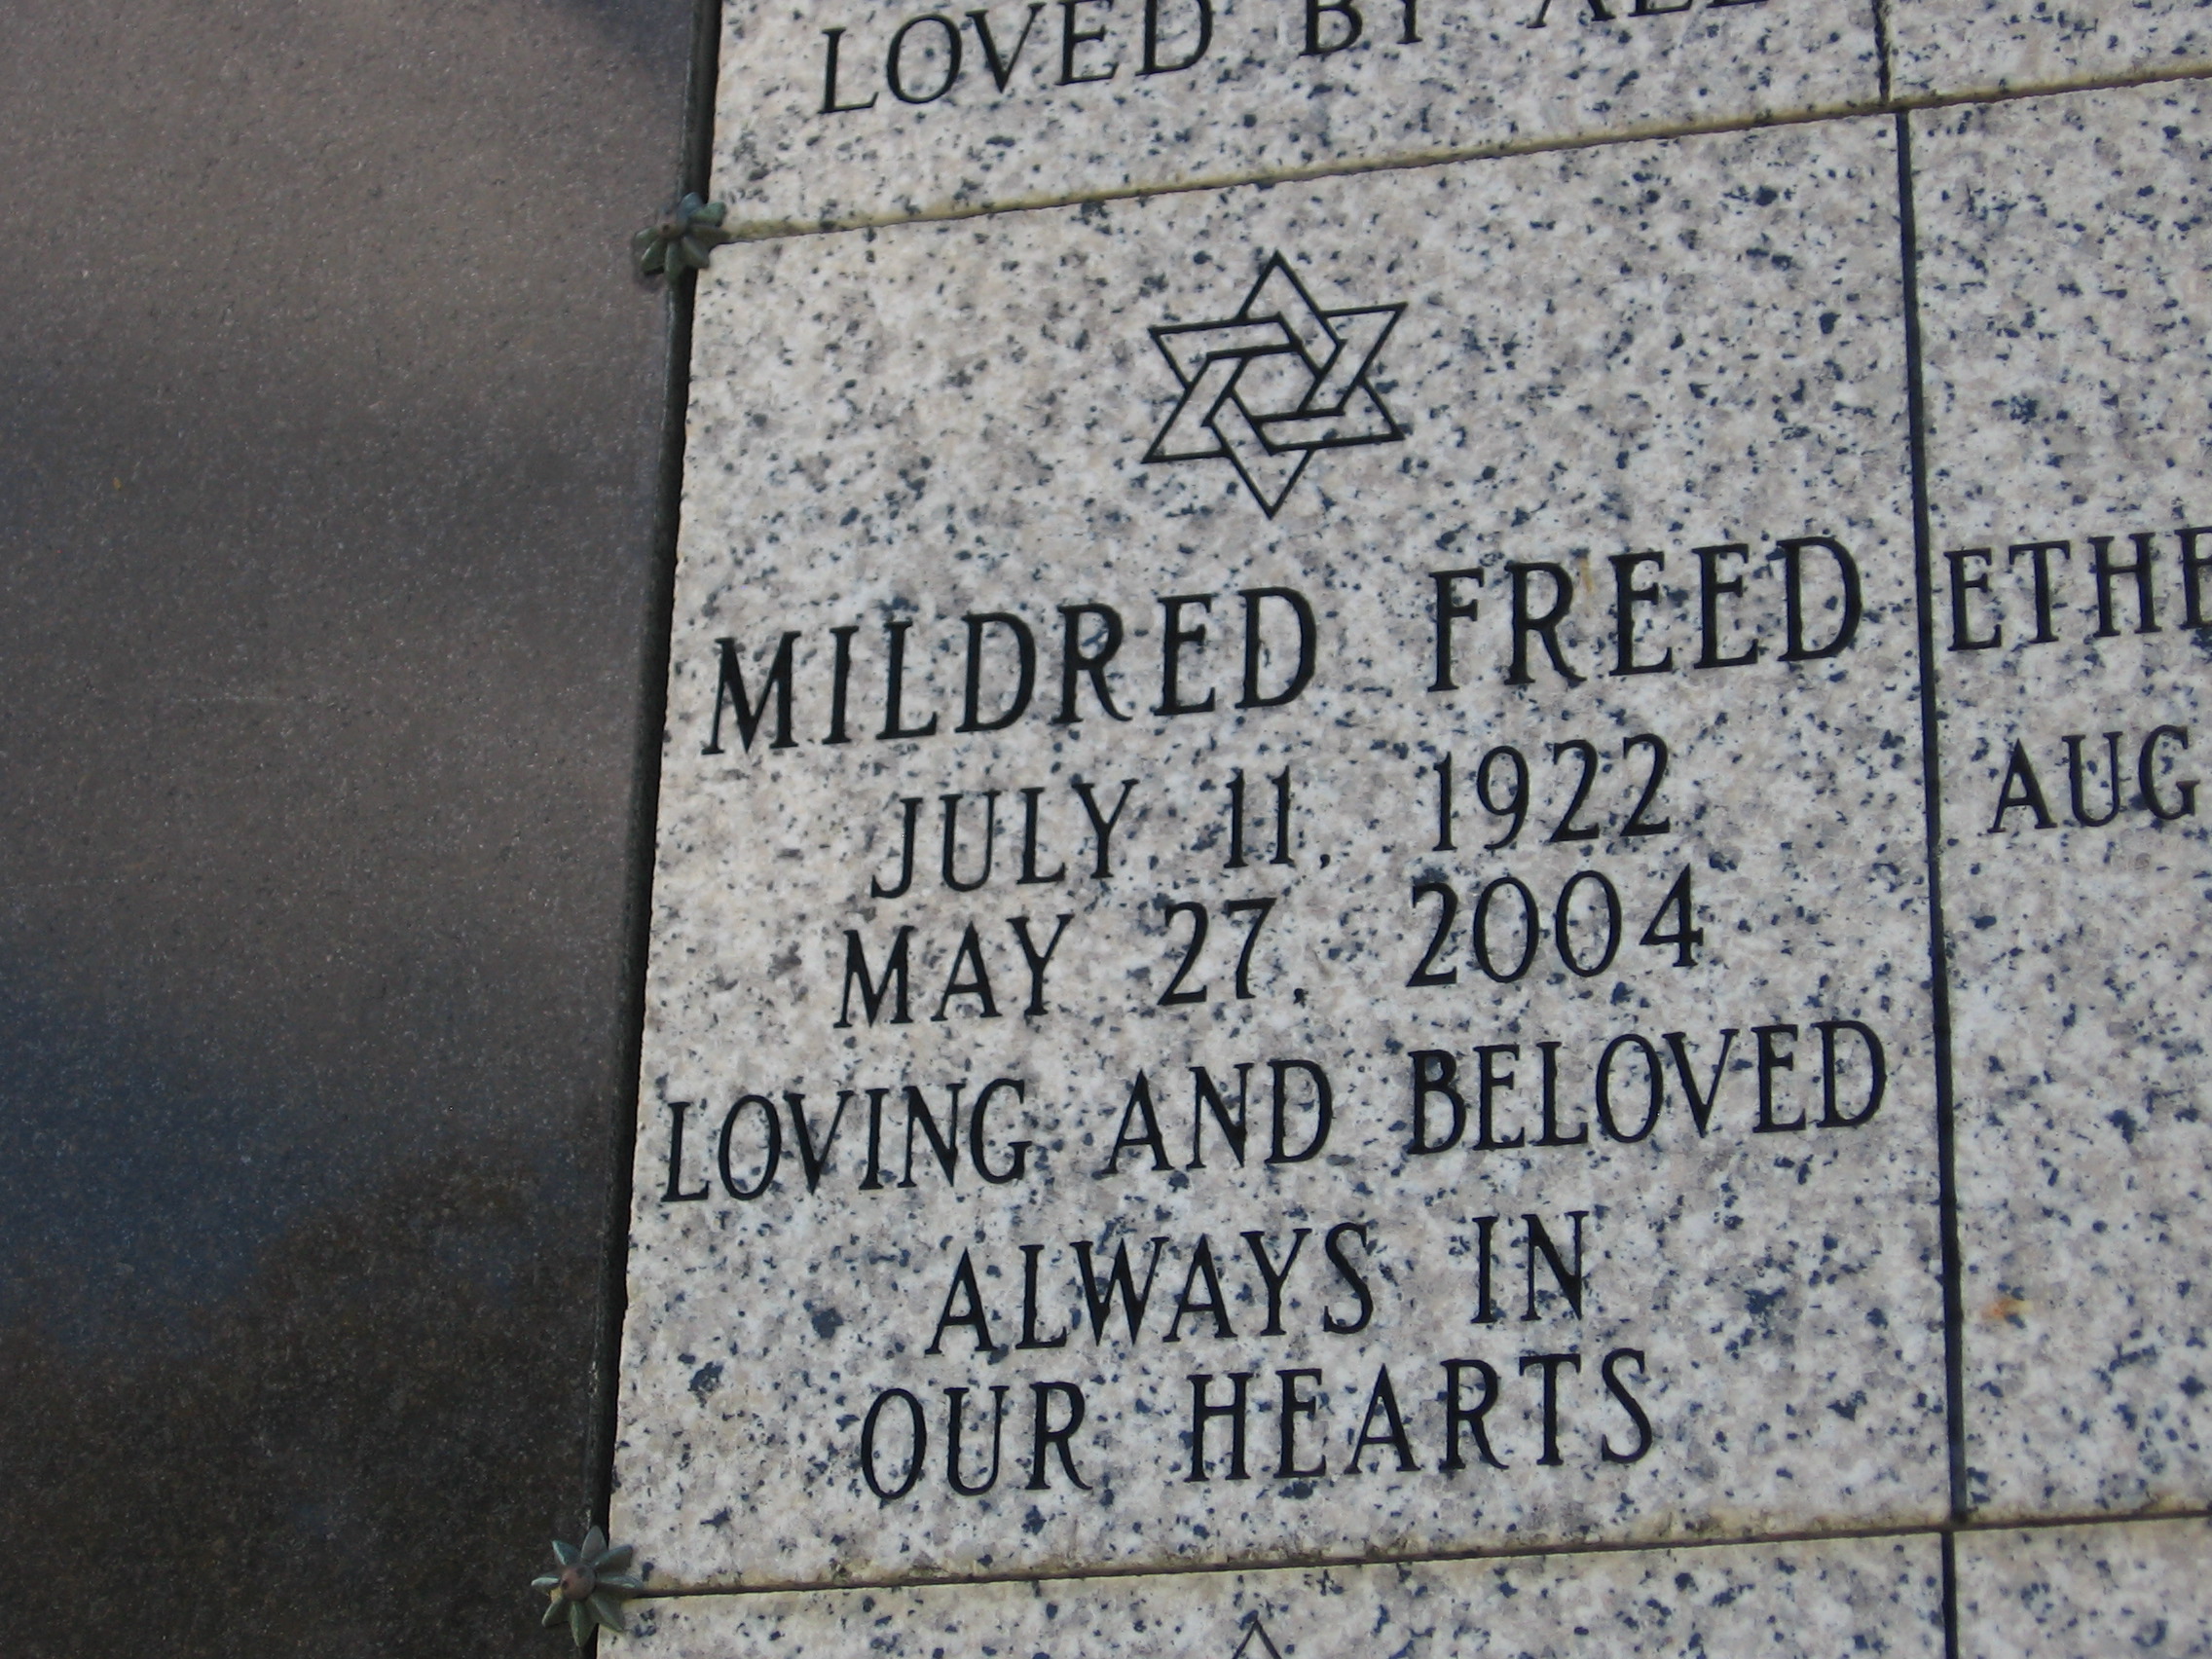 Mildred Freed